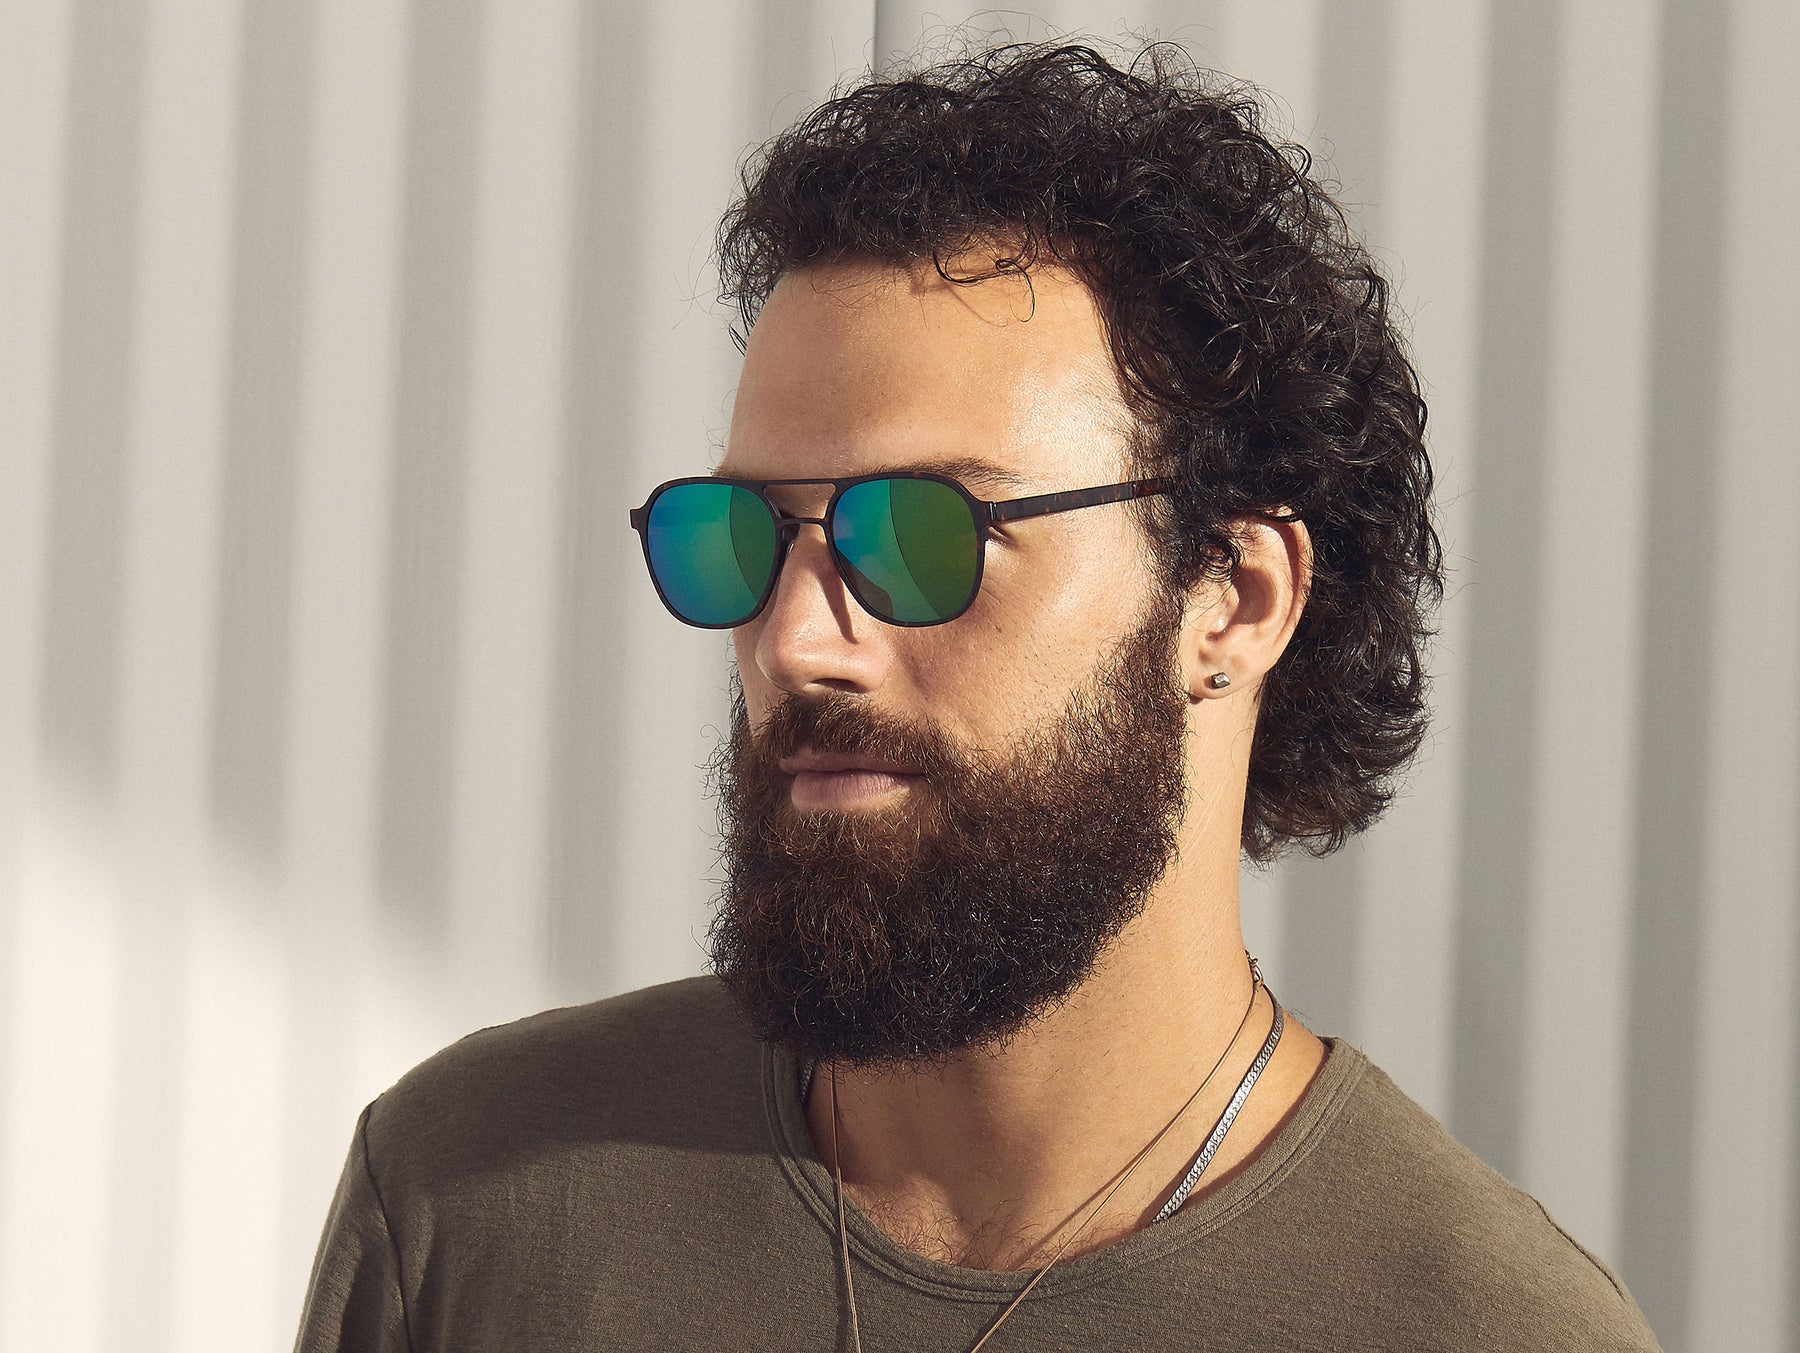 Model is wearing The ZULU-T SUN in Tortoise/Pine in size 54 with Green Flash Mirror Lenses